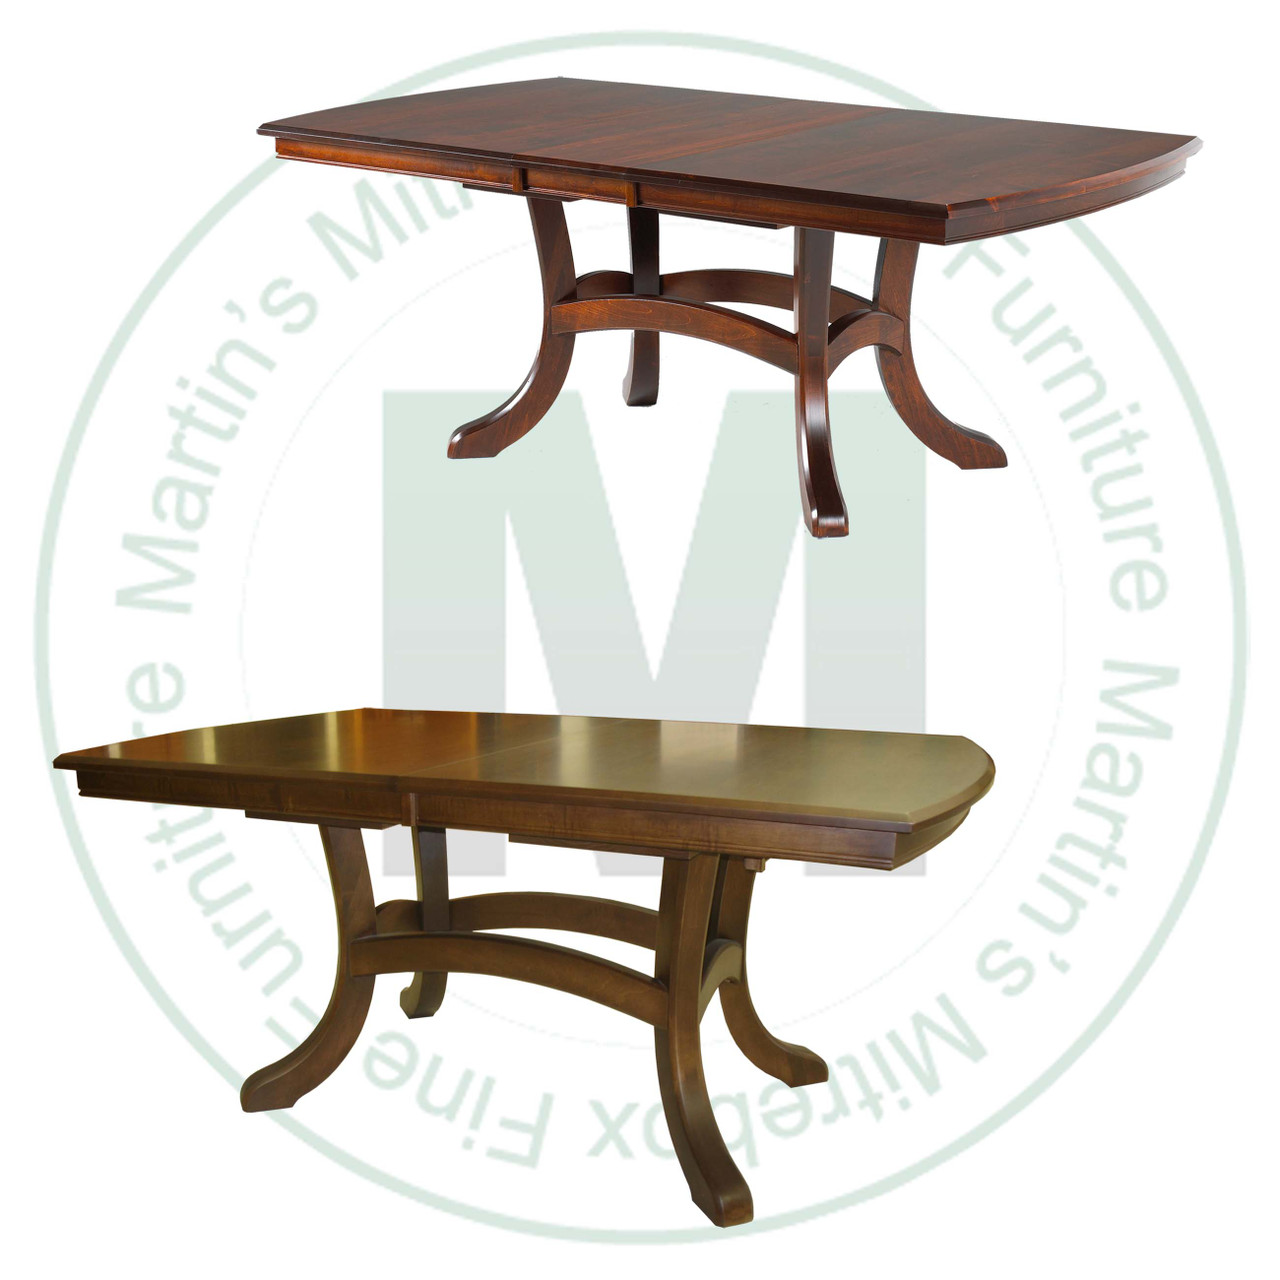 Oak Jordan Double Pedestal Table 42''D x 72''W x 30''H With 2 - 12'' Leaves. Table Has 1'' Thick Top